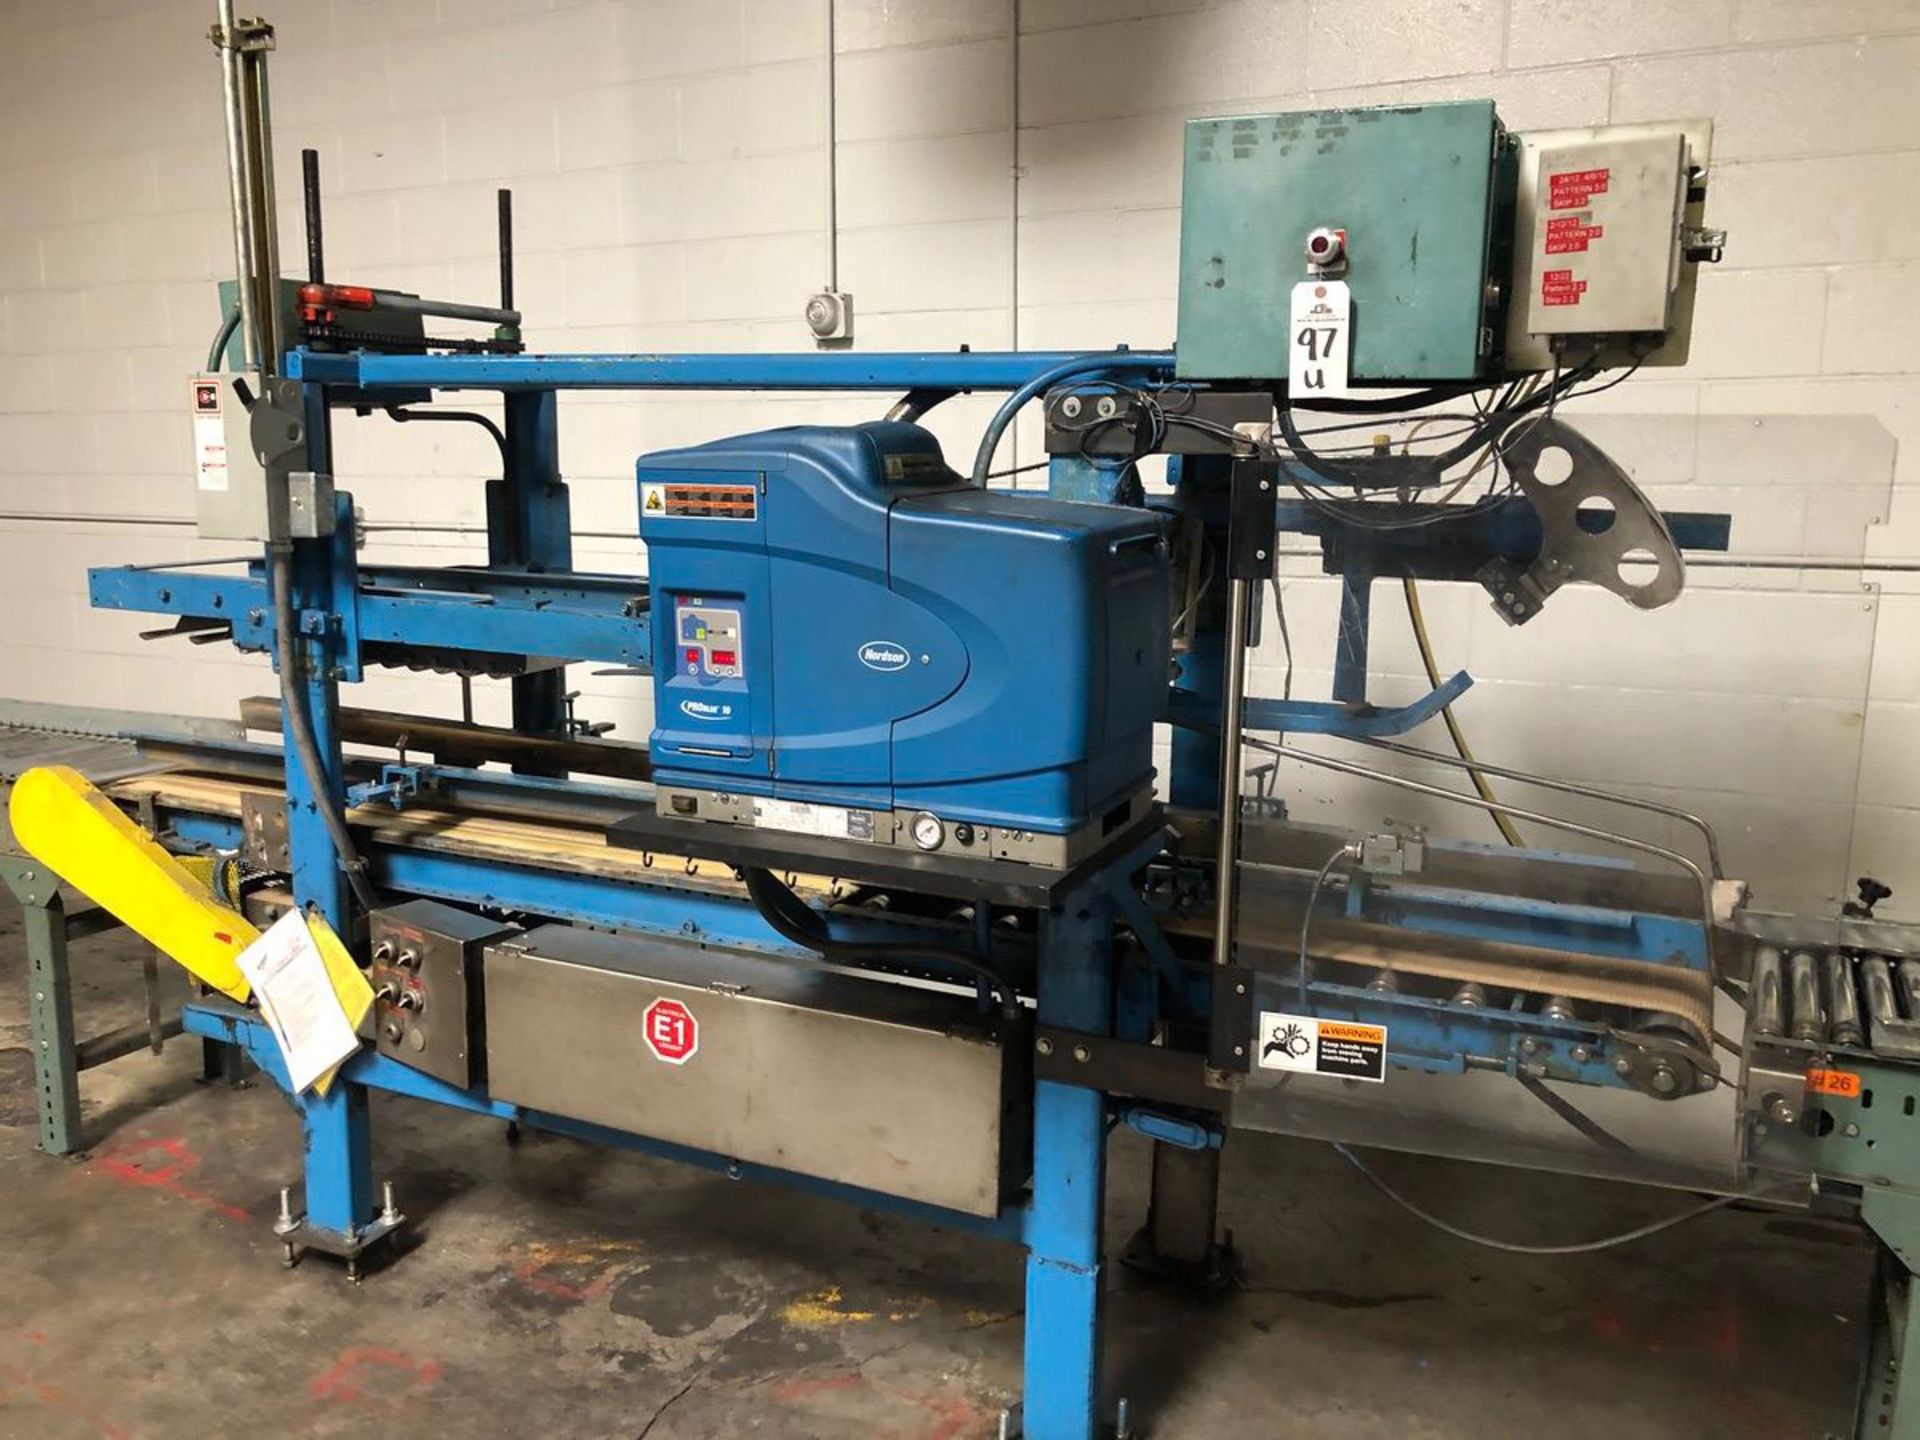 PEARSON TOP SEALER WITH NORDSON PRO BLUE MELTER - Subj to Bulk | Rig Fee: 200